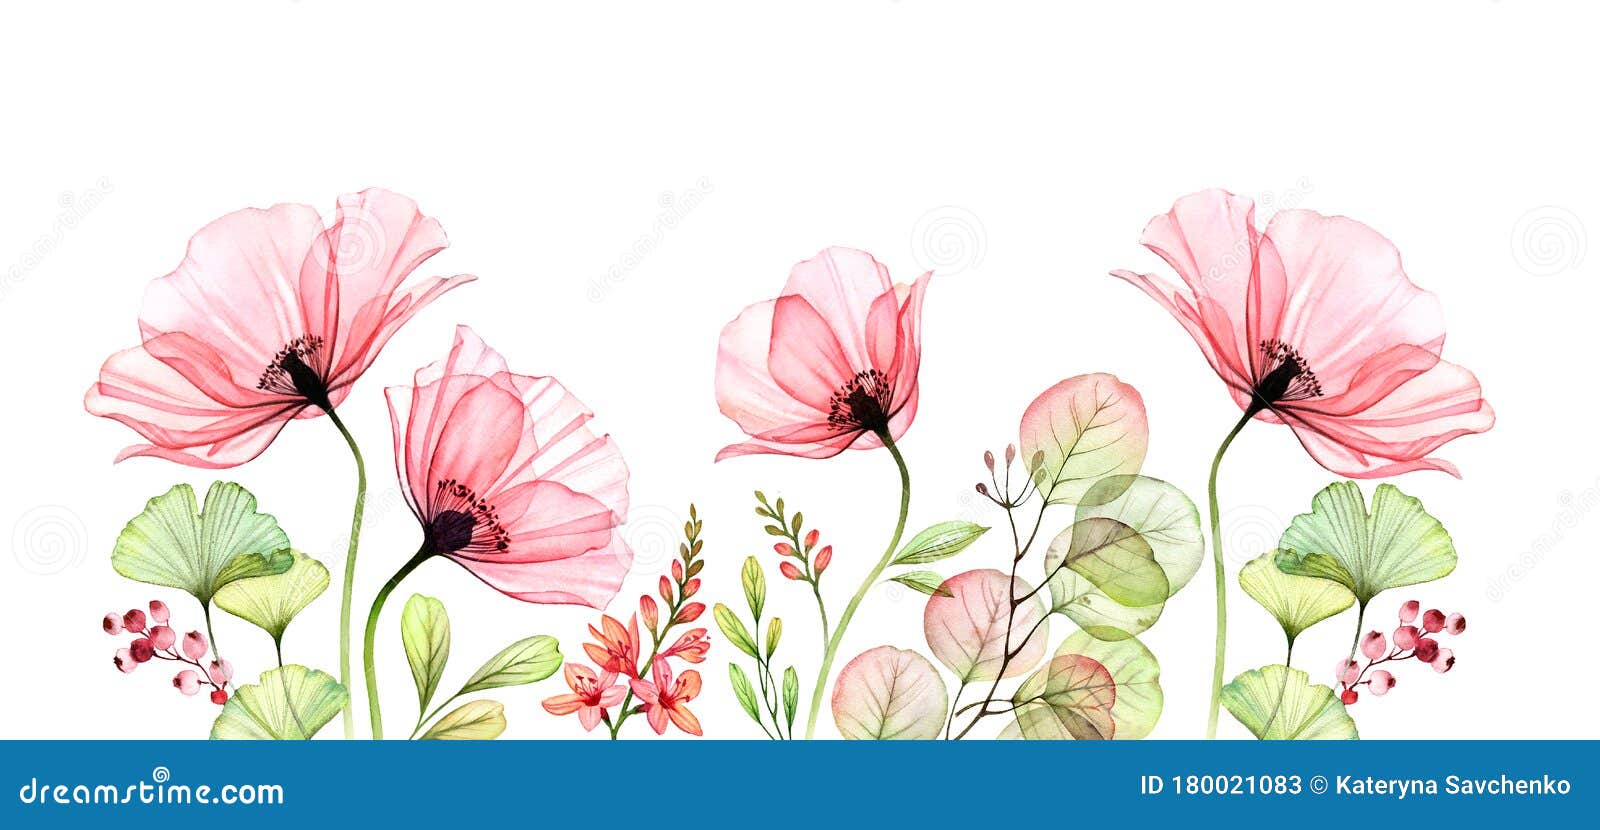 watercolor poppy bottom border. horizontal floral background. abstract pink flowers with leaves on white. botanical